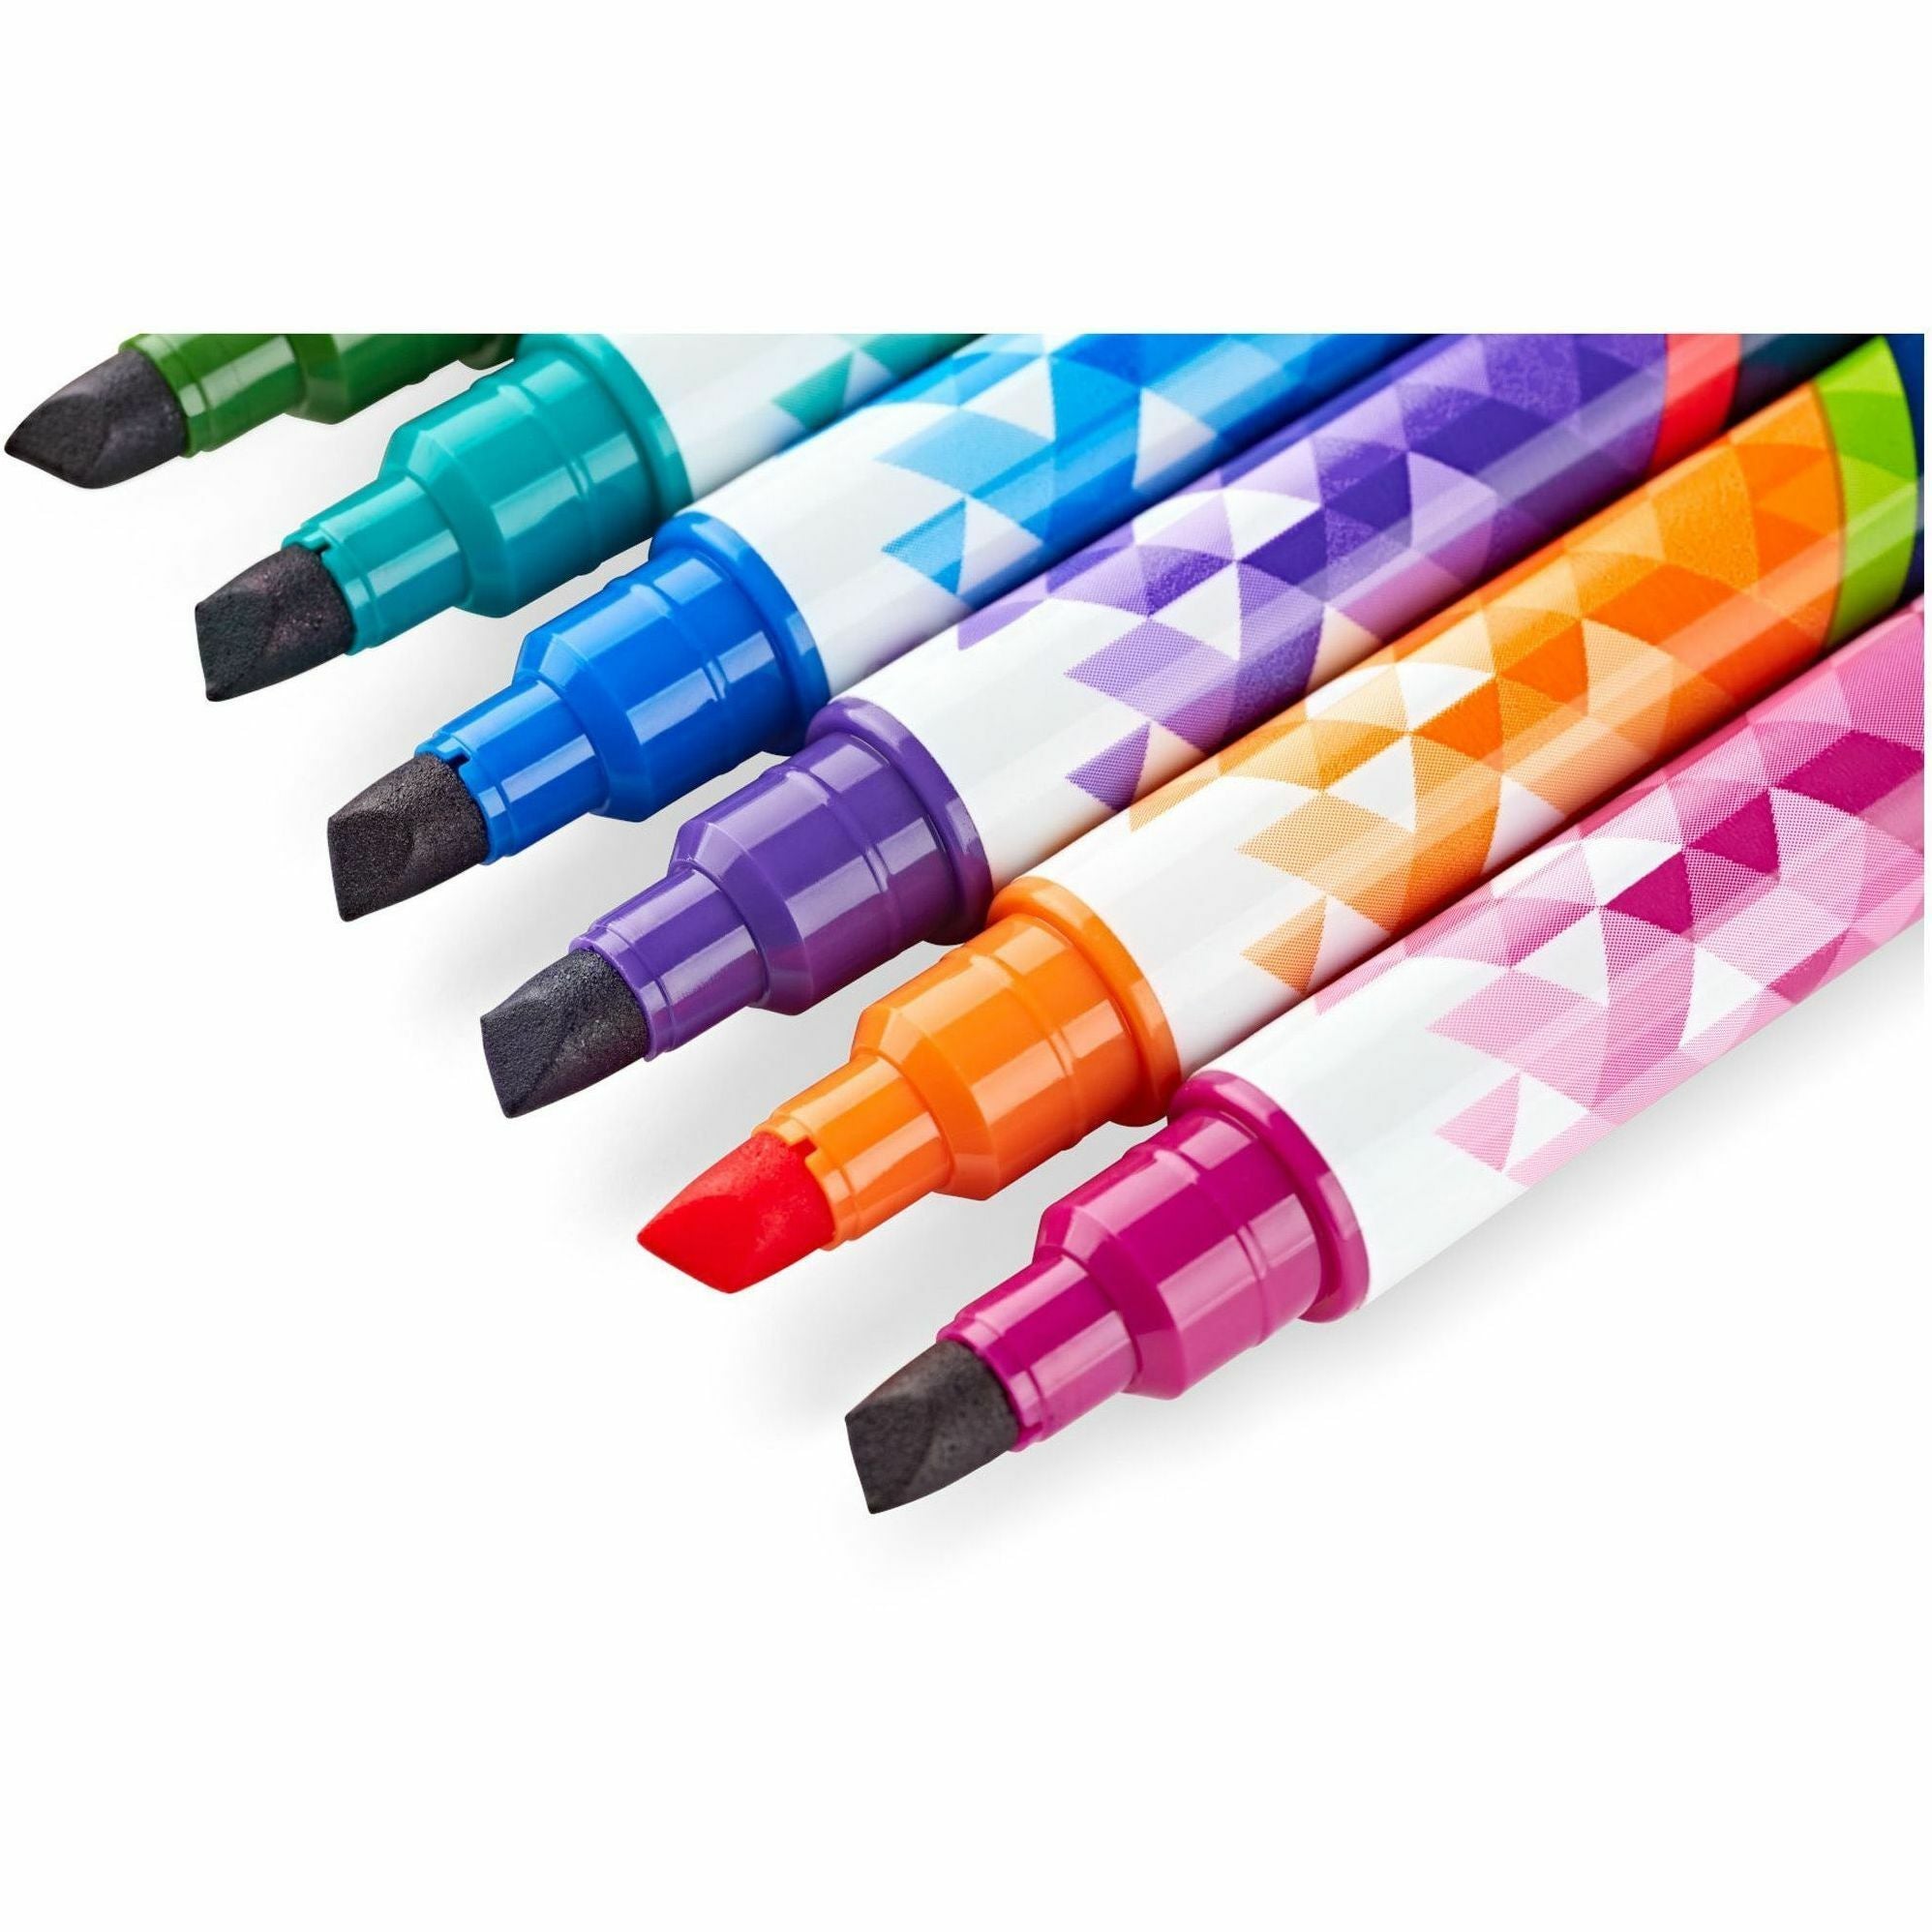 crayola-color-change-doodle-markers-chisel-marker-point-style-multicolor-8-pack_cyo588315 - 7